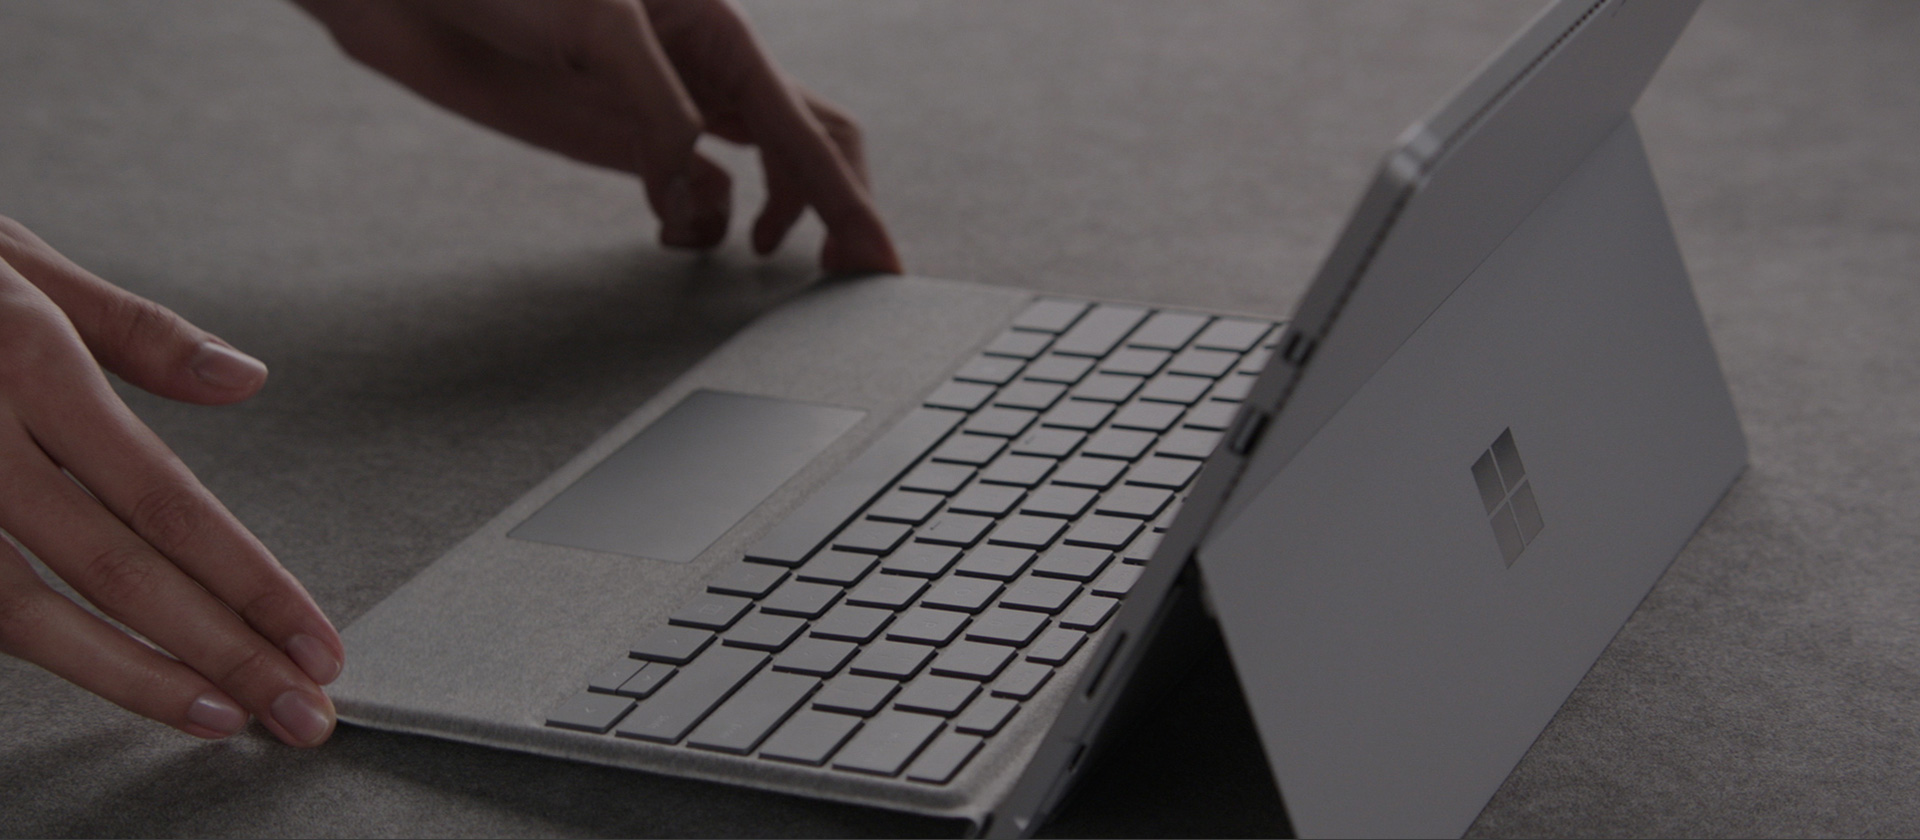 Microsoft Surface Signature Type Cover Technical Specs, Beauty & innovation in every detail.